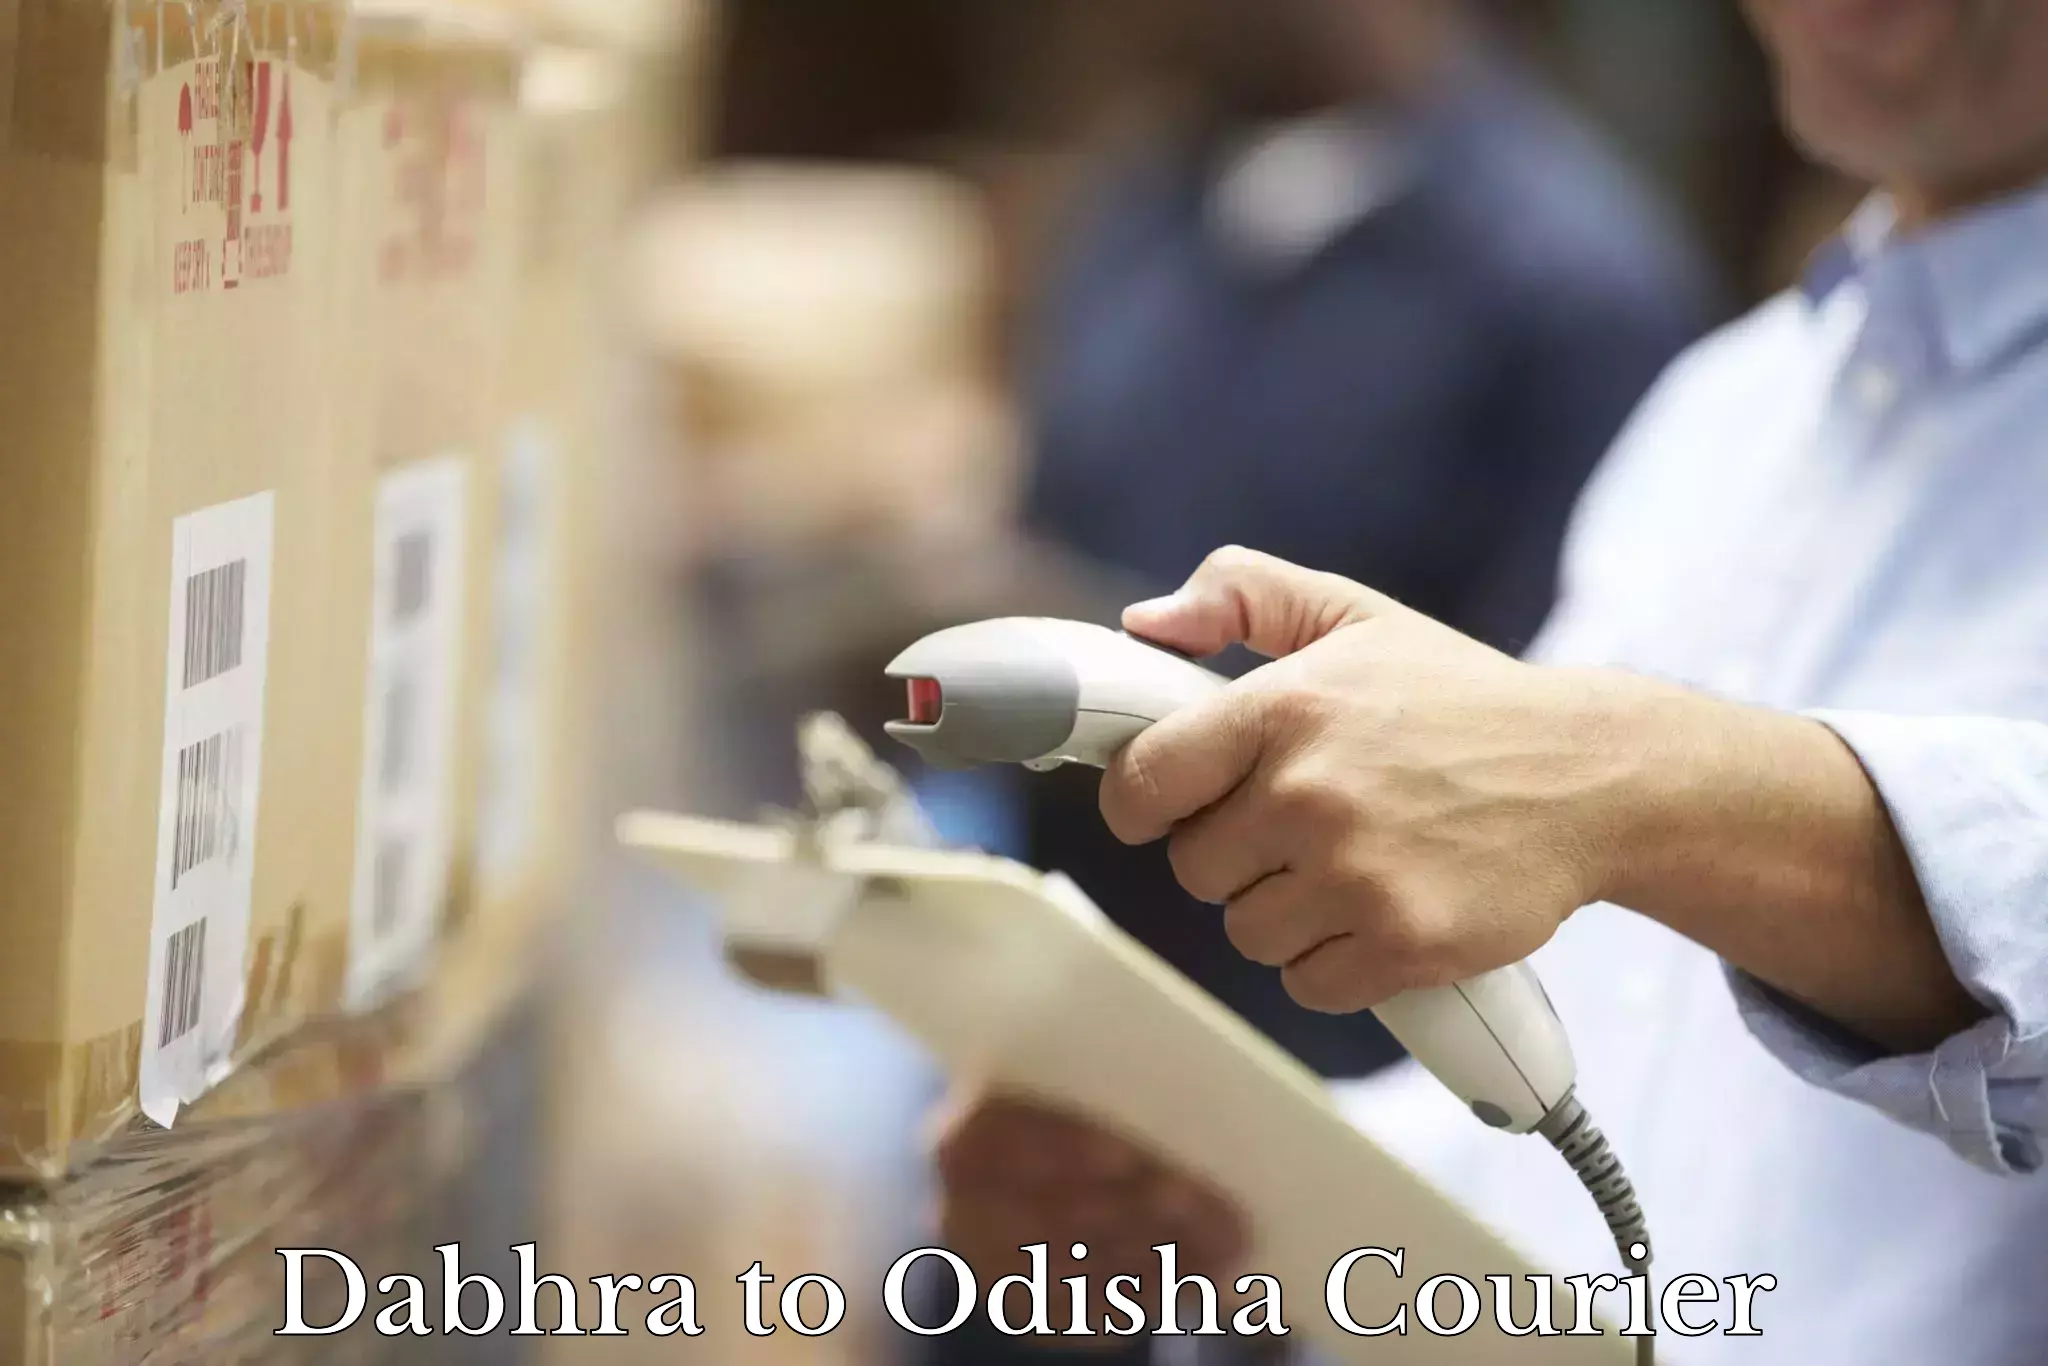 Residential courier service Dabhra to Nabarangpur